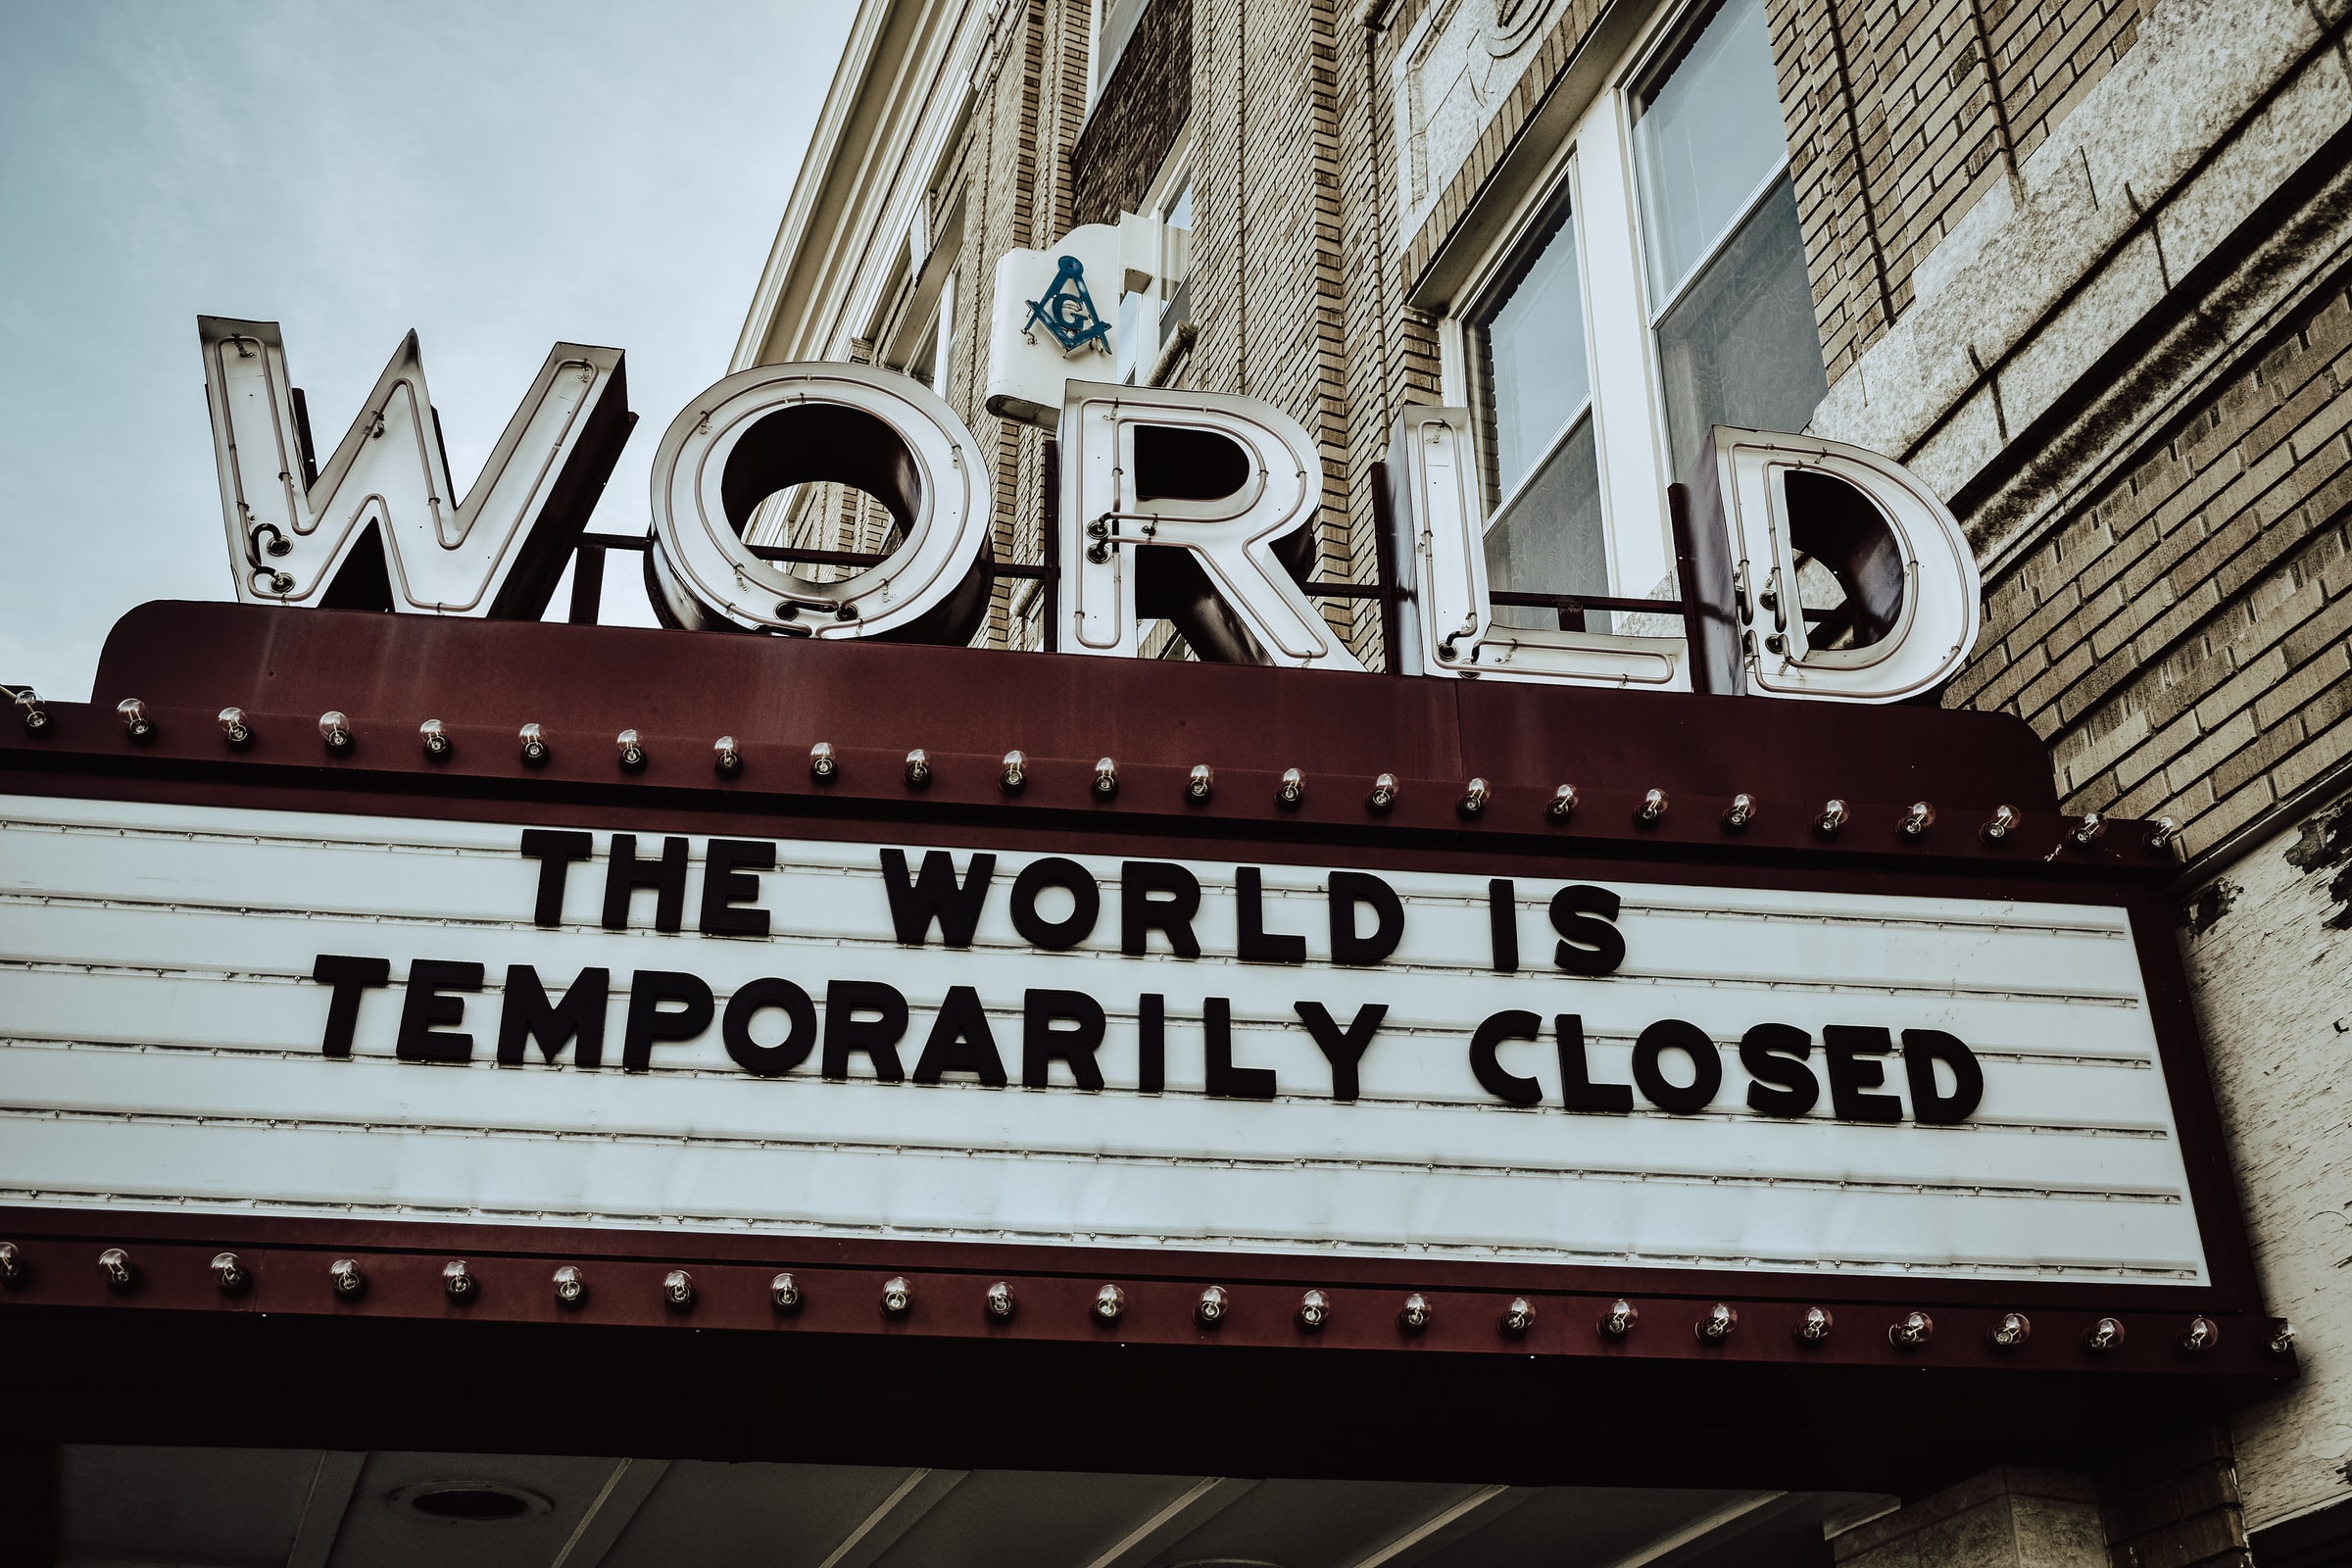 World Theater with text the World is Temporarily Closed on its marquee